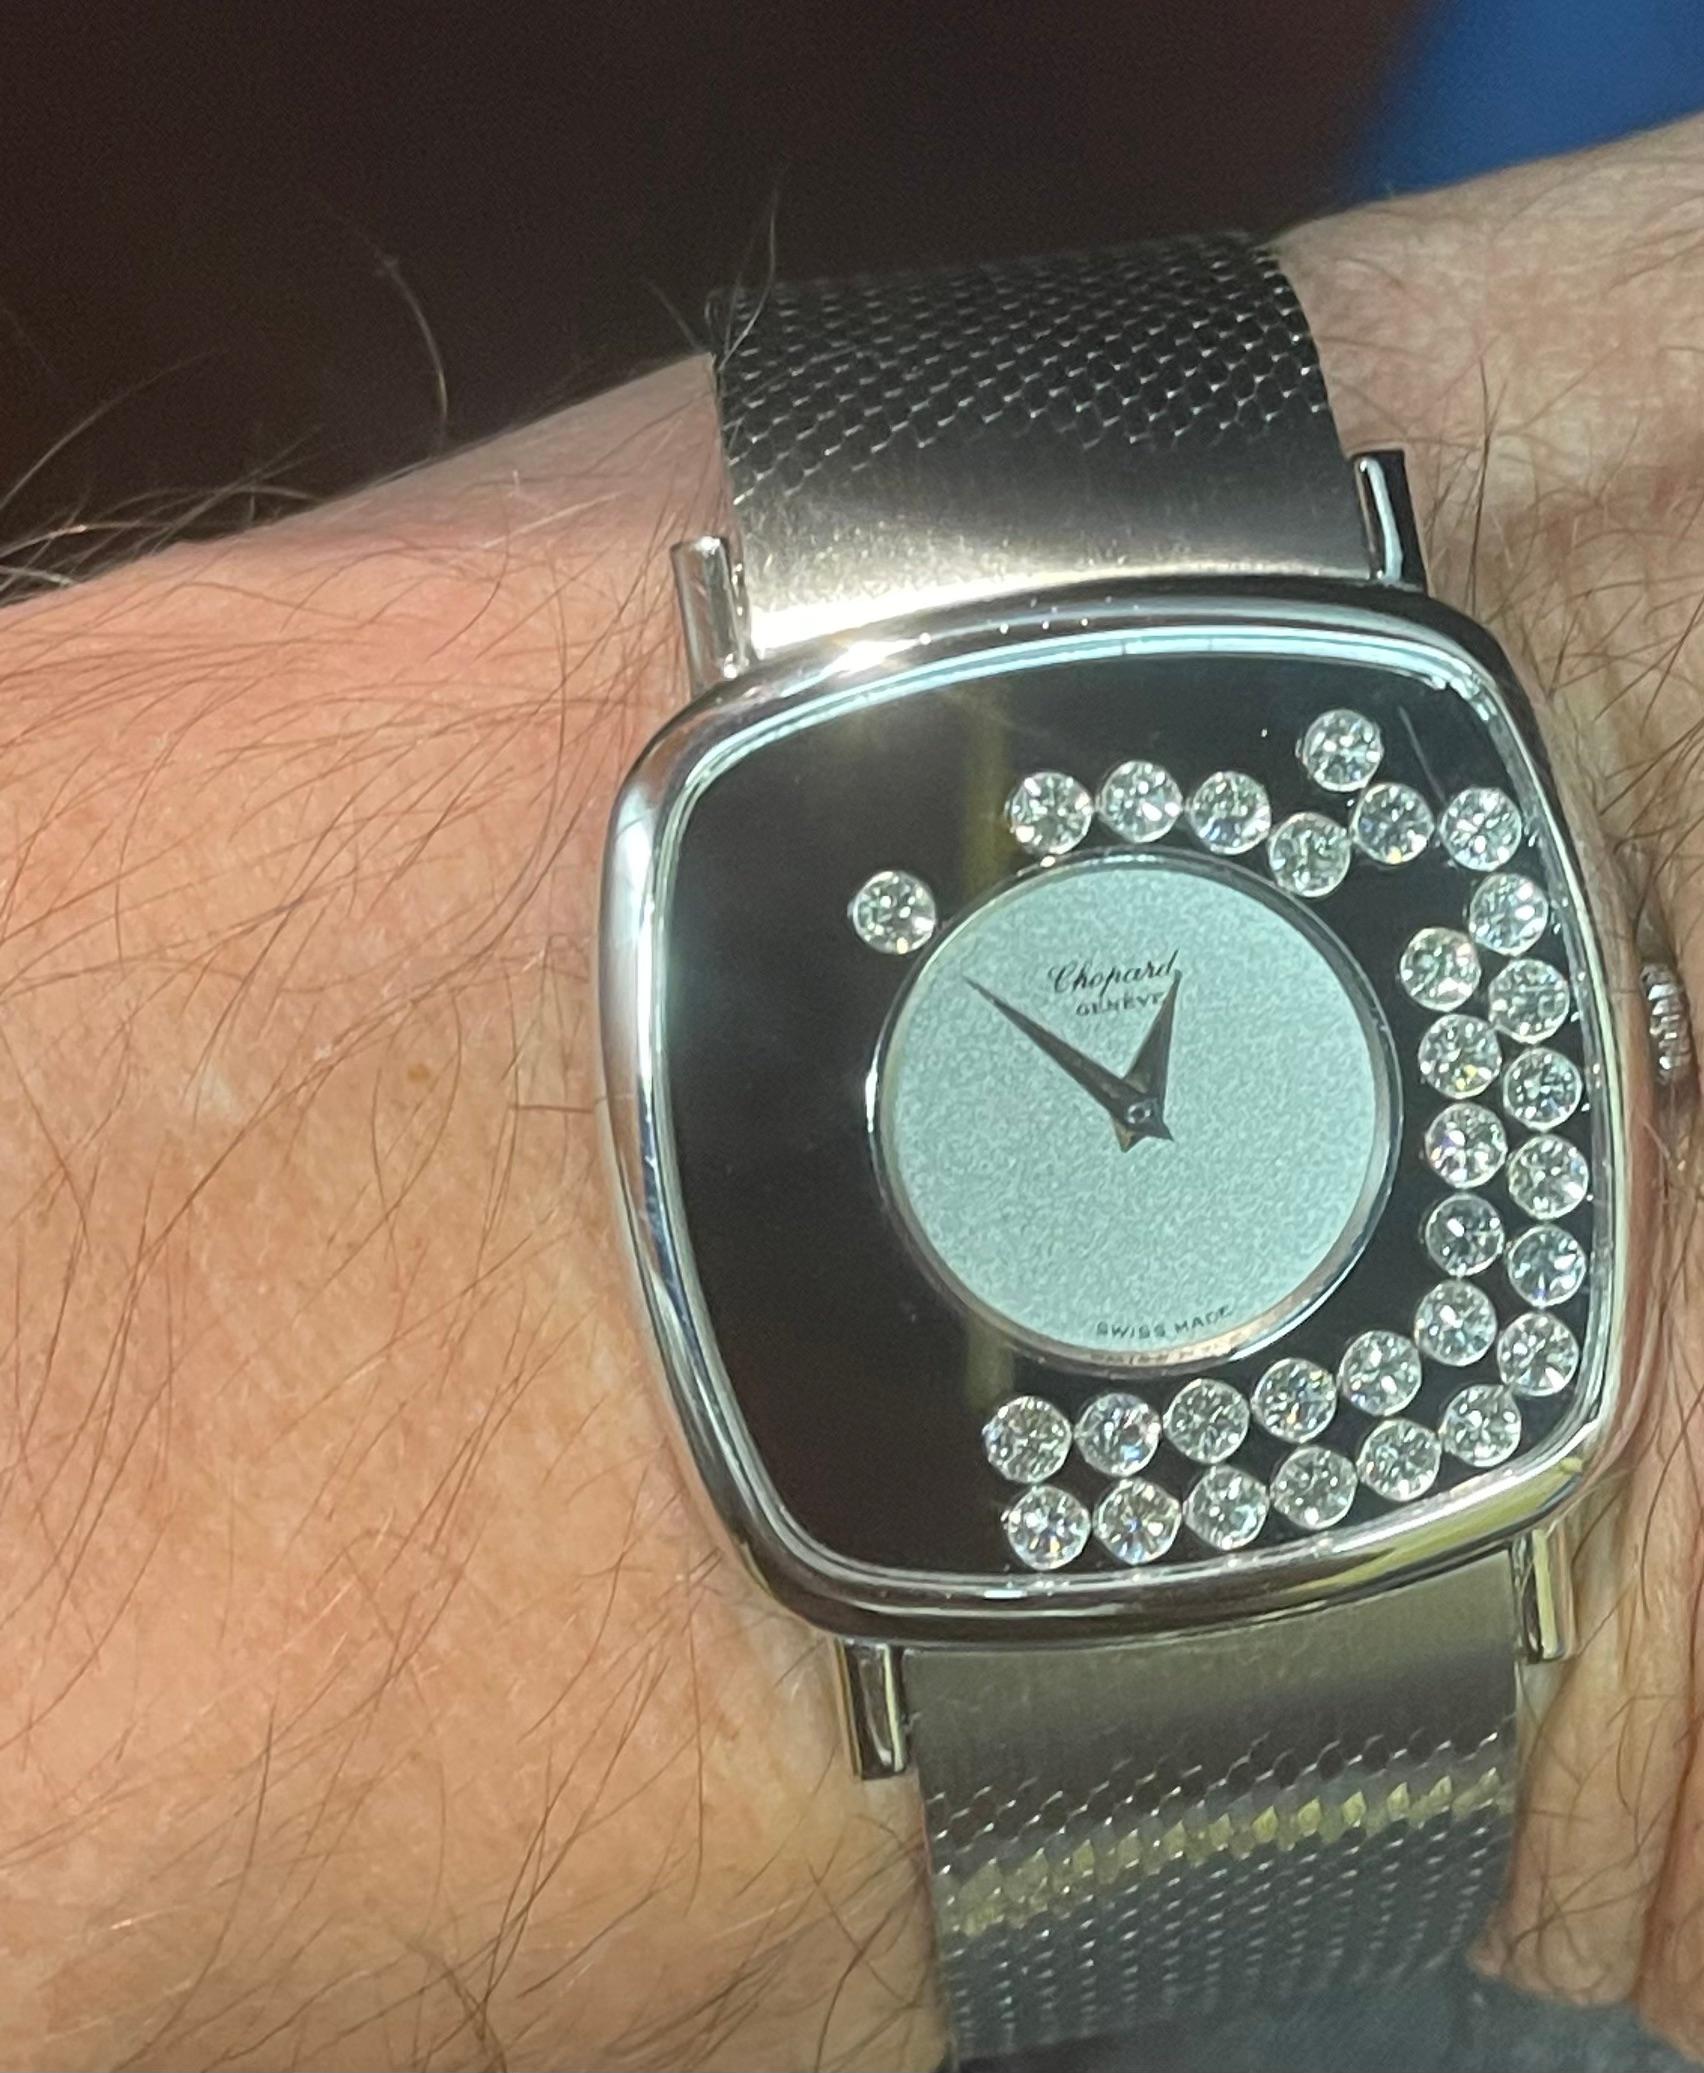 this design was the biggest success in the history of chopard. designer
ronald kurowski was inspired by water droplets sparkling in the sunshine at a waterfall and decided to design a mens watch with moving diamonds, that also flash in the sun. it